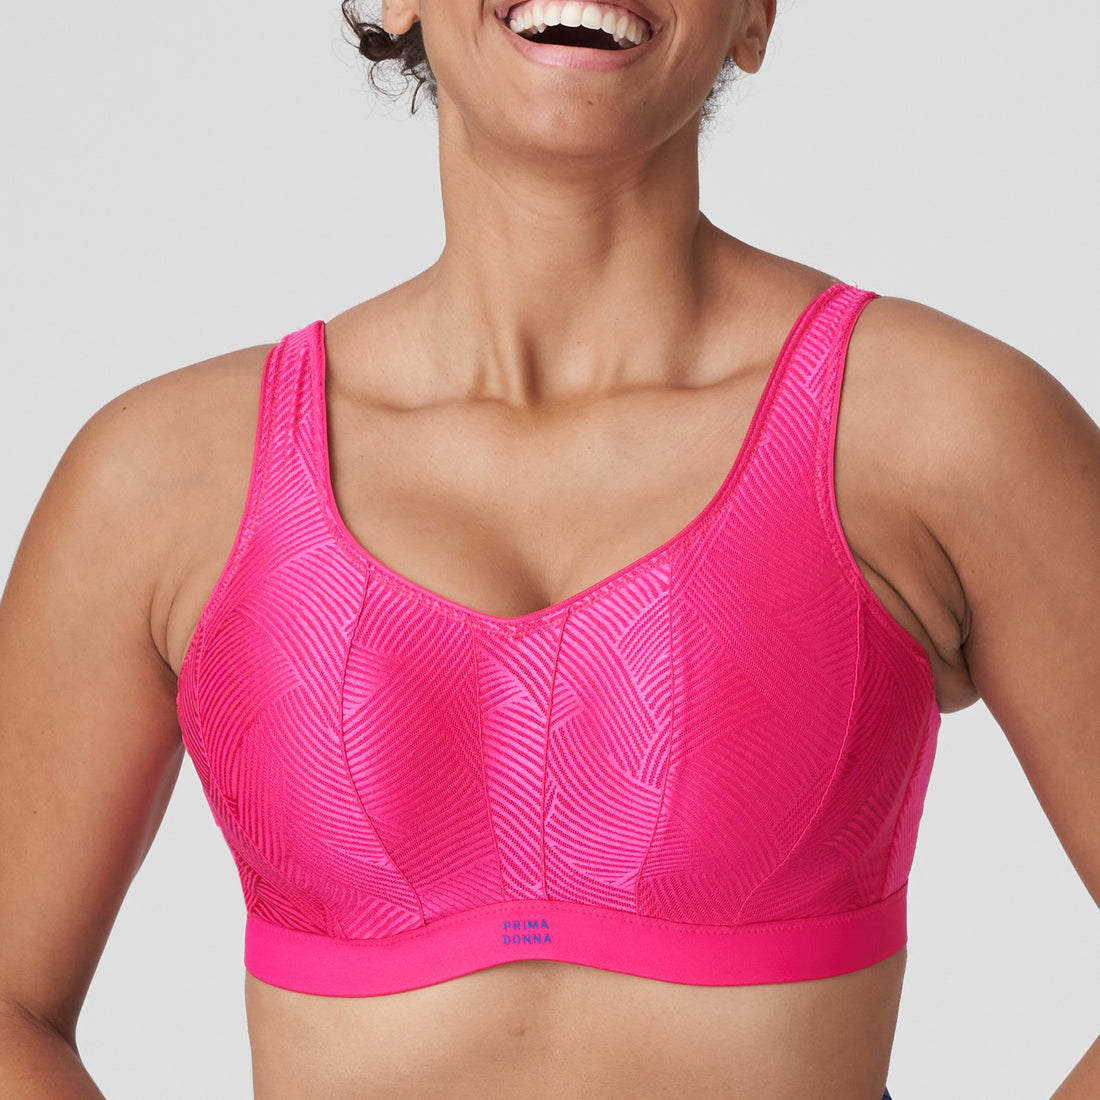 Primadonna Sport The Game Padded Sports Bra (6000516) Electric Pink